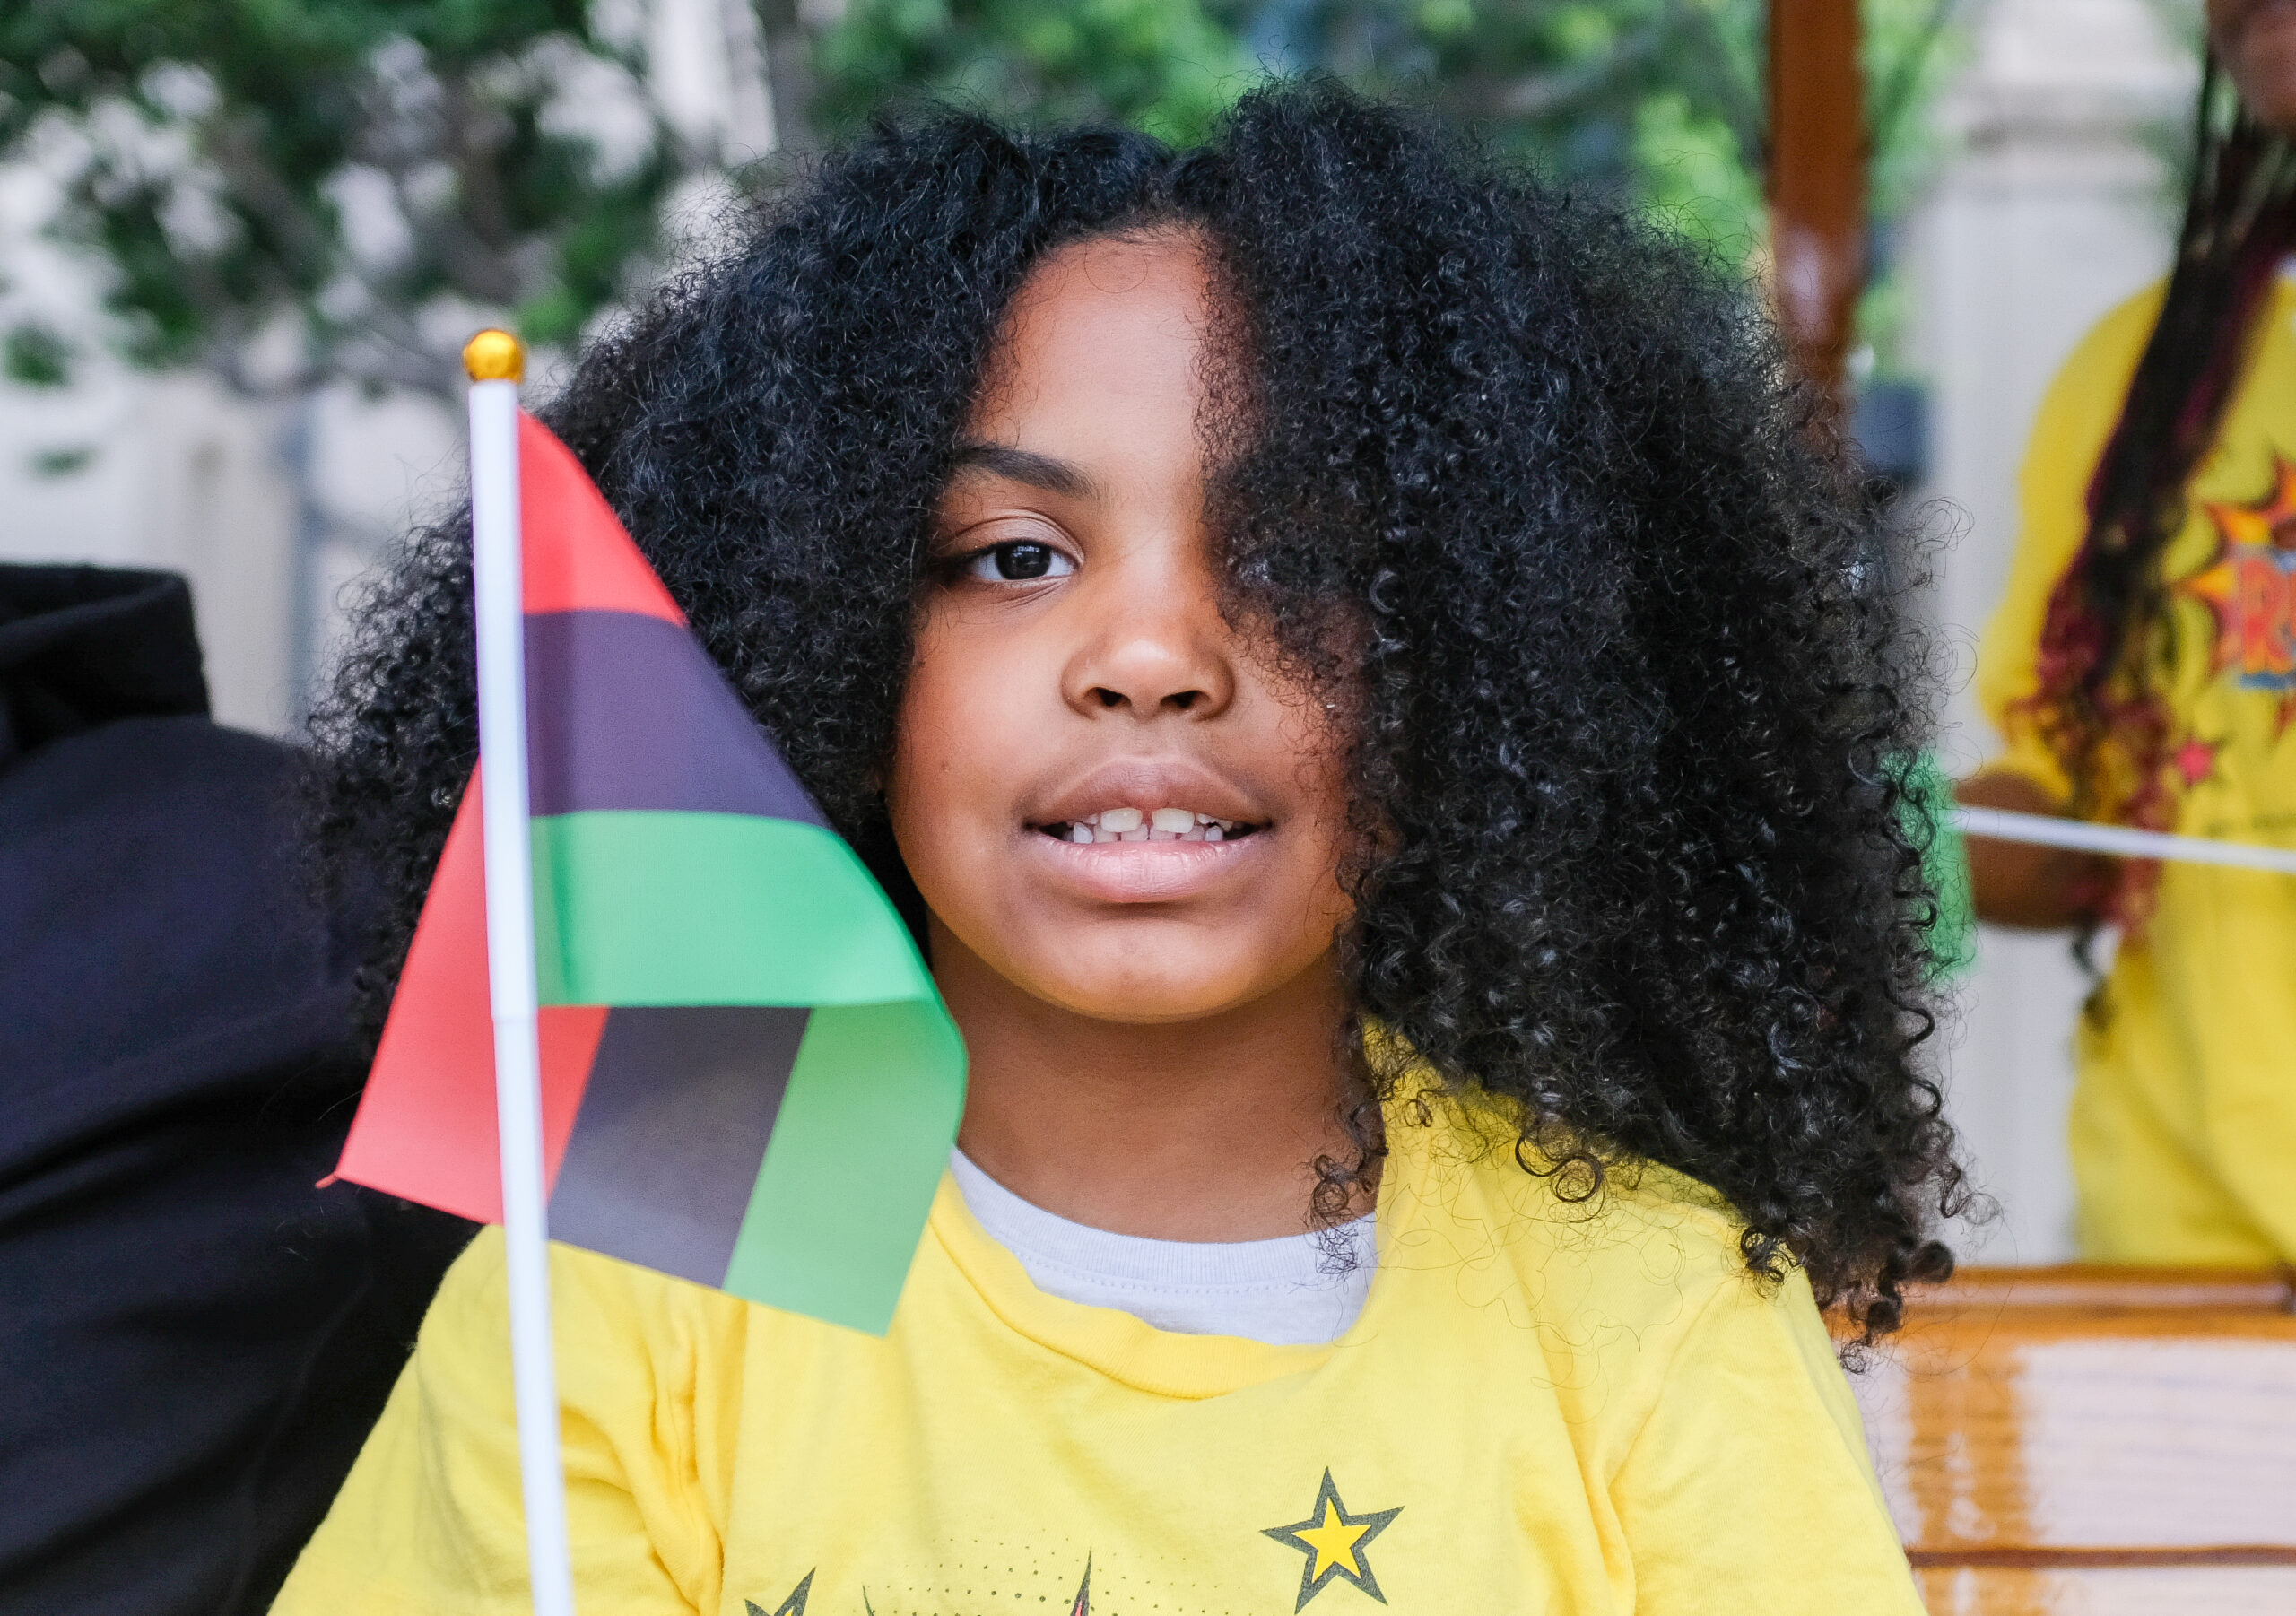 A child with curly hair holding a flag, wearing a yellow shirt with a star, smiles gently.